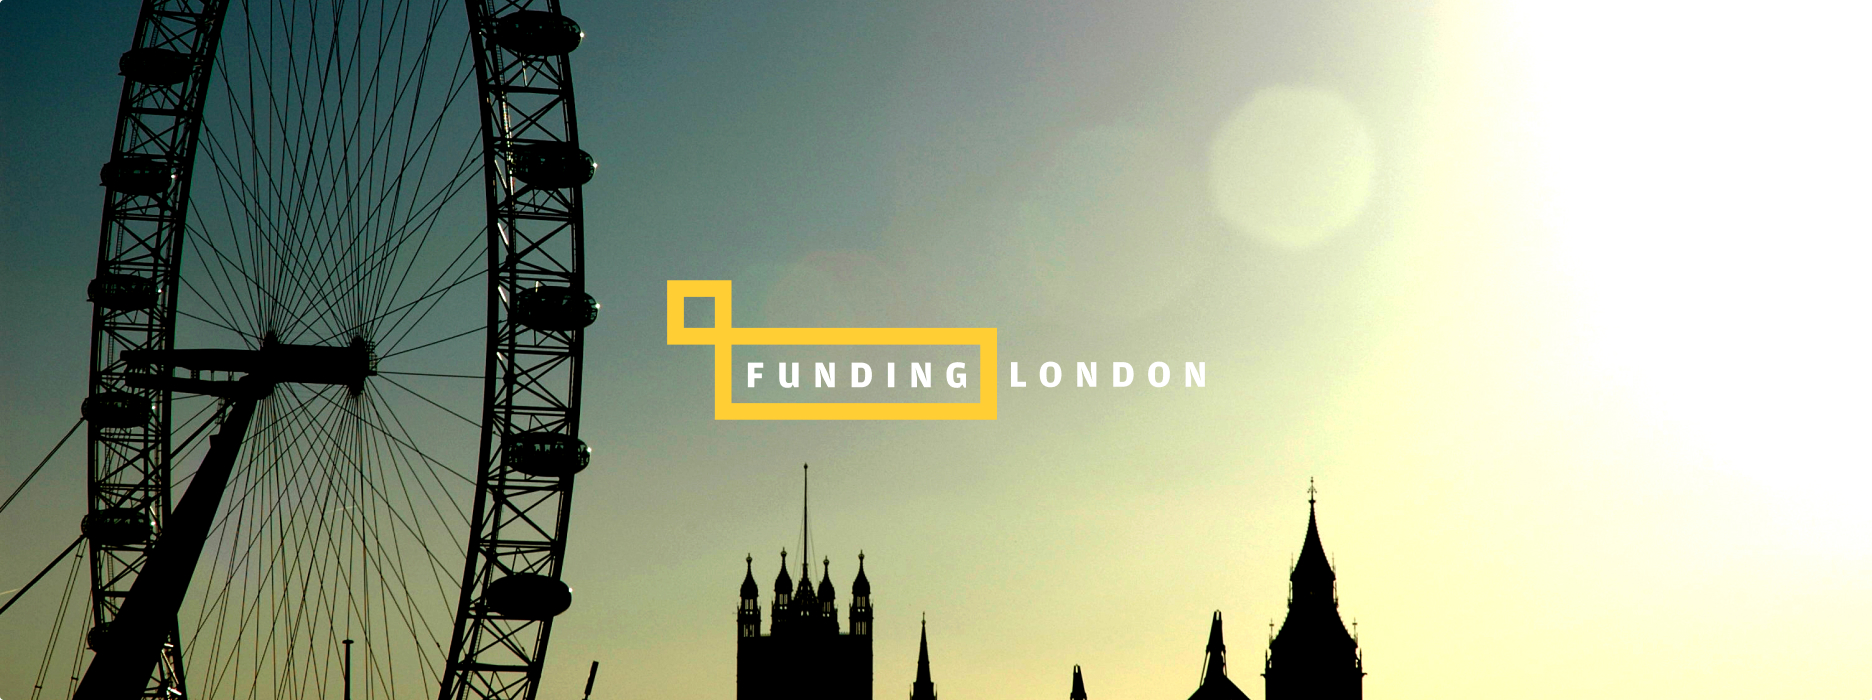 Funding London logo overlayed on a photograph of the London skyline where the London Eye is the dominant feature